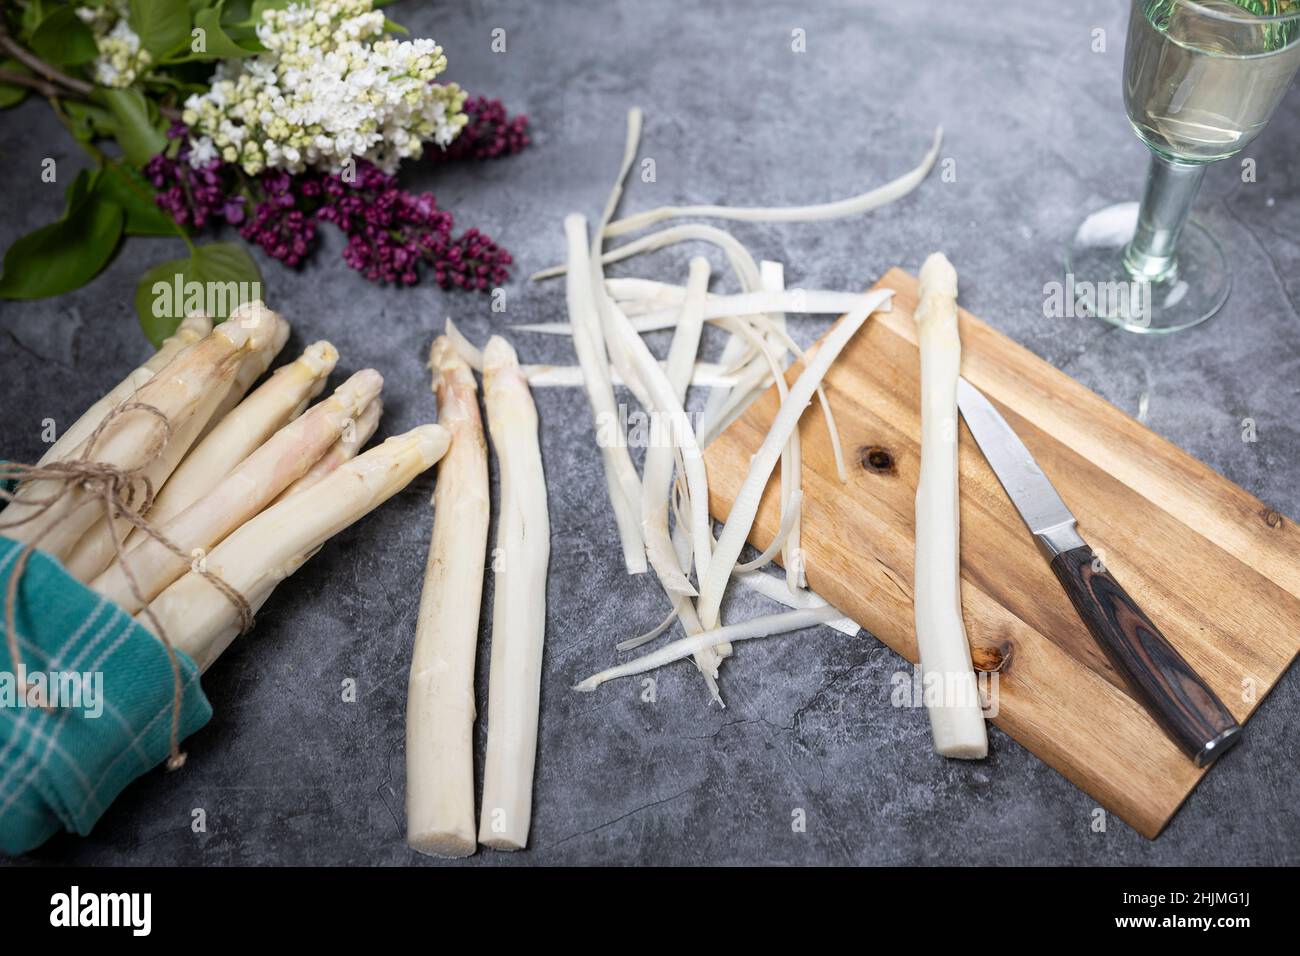 Bunch of fresh white asparagus on a stone table Stock Photo